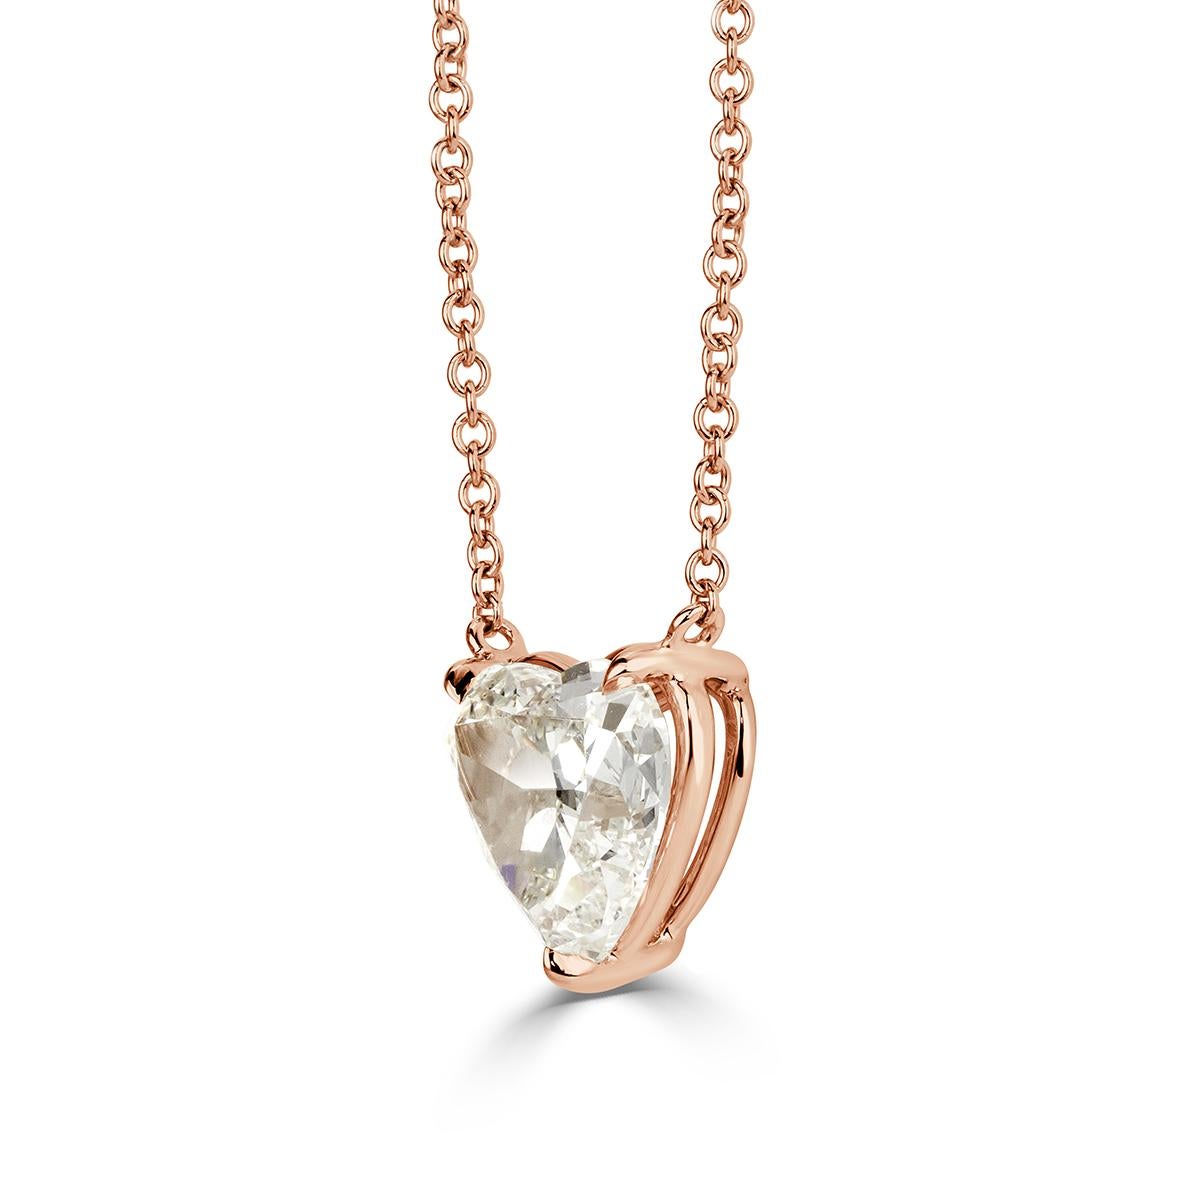 This exquisite diamond pendant showcases a beautiful heart shaped center diamond GIA certified at K-SI2. It radiates intense brilliance in our custom 18k rose gold setting and falls beautifully on the neckline.